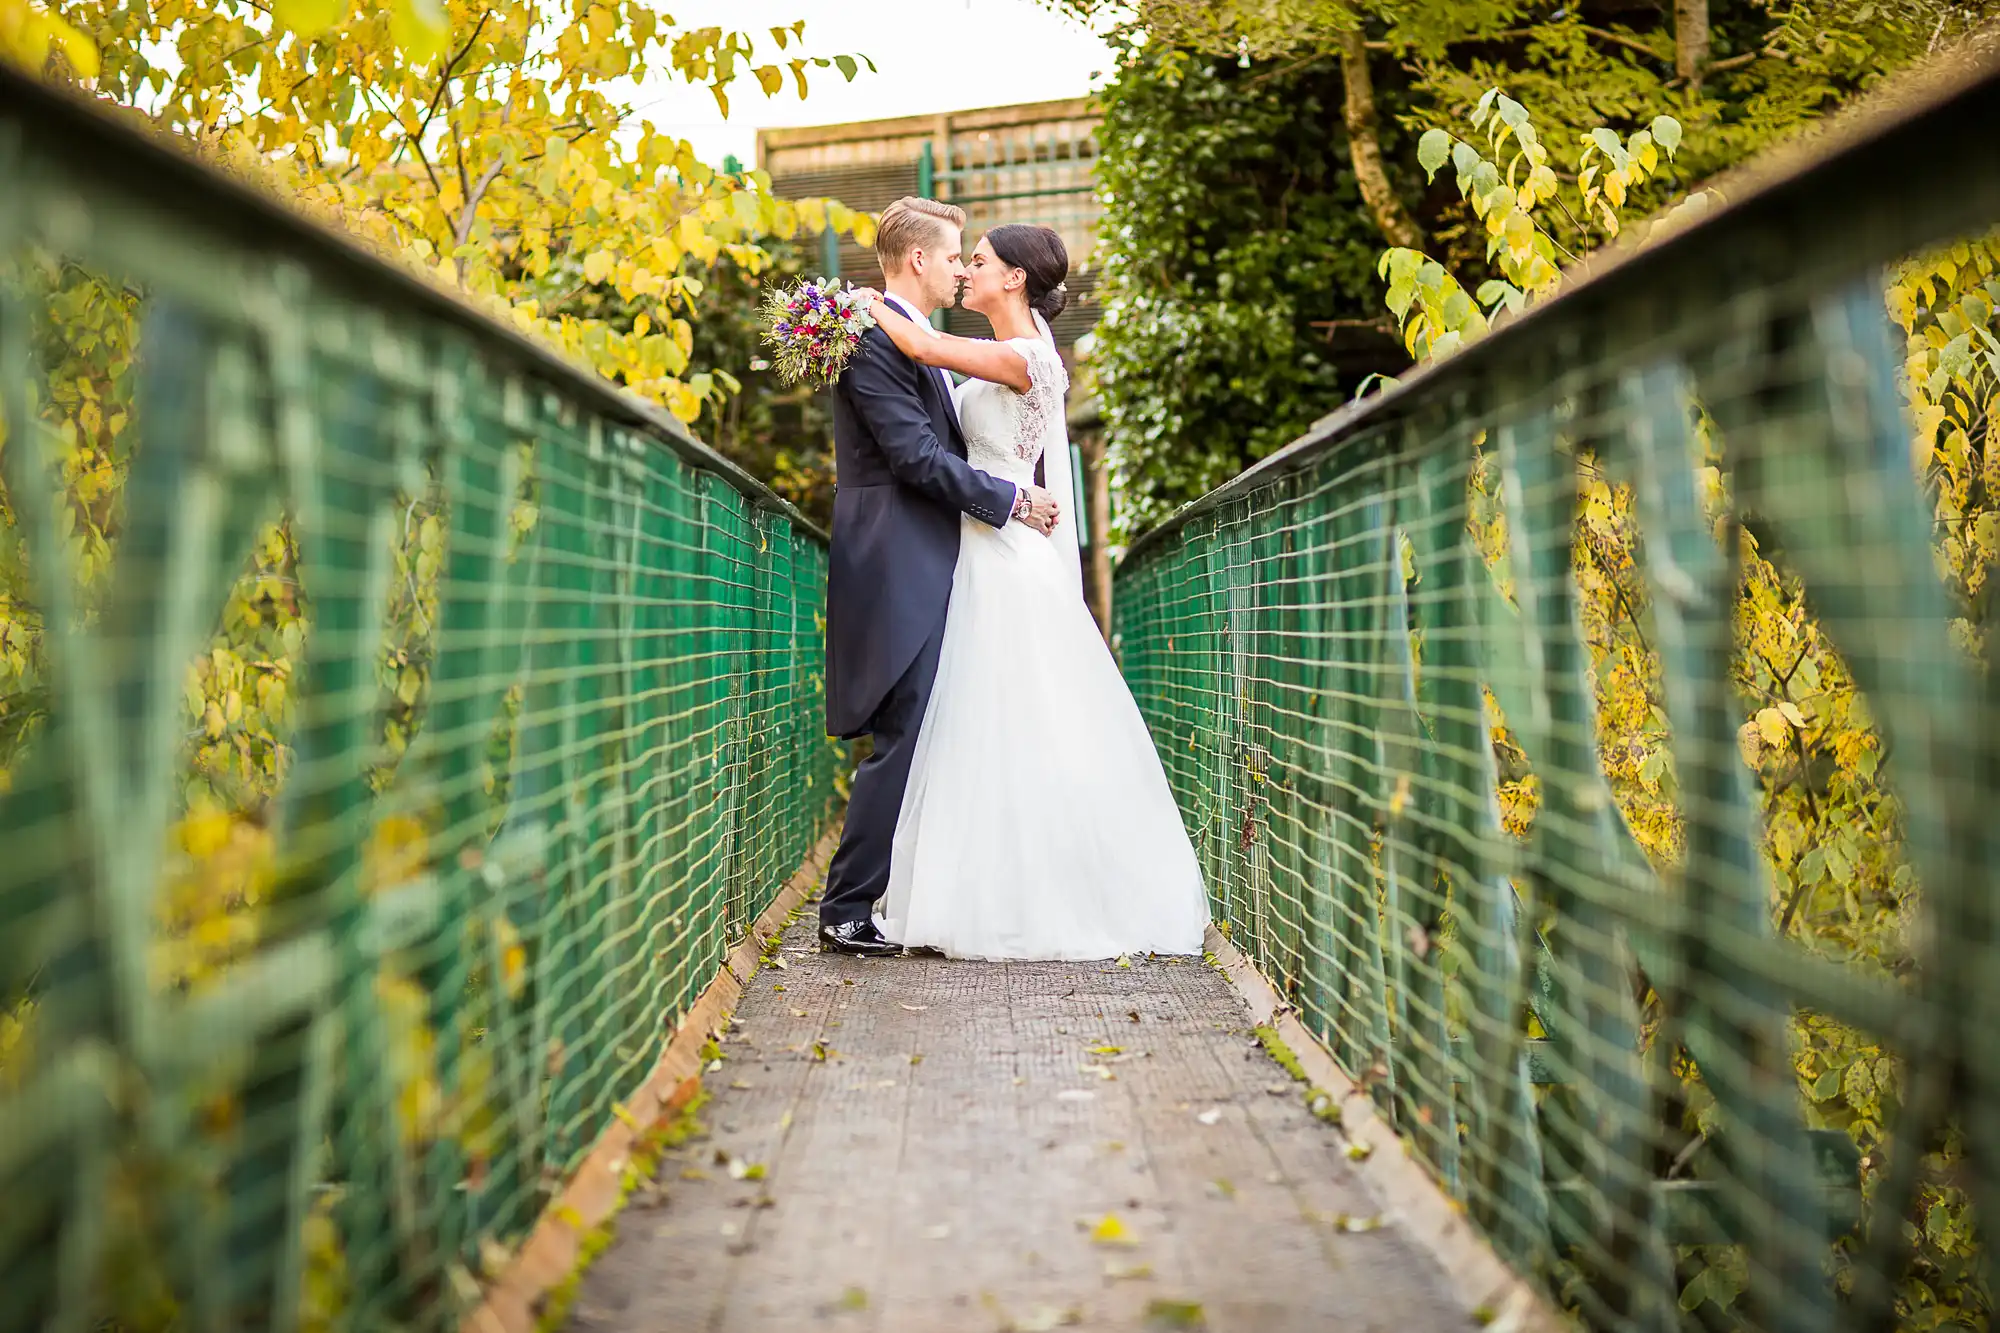 A bride and groom kissing on a bridge surrounded by green mesh and autumn leaves.